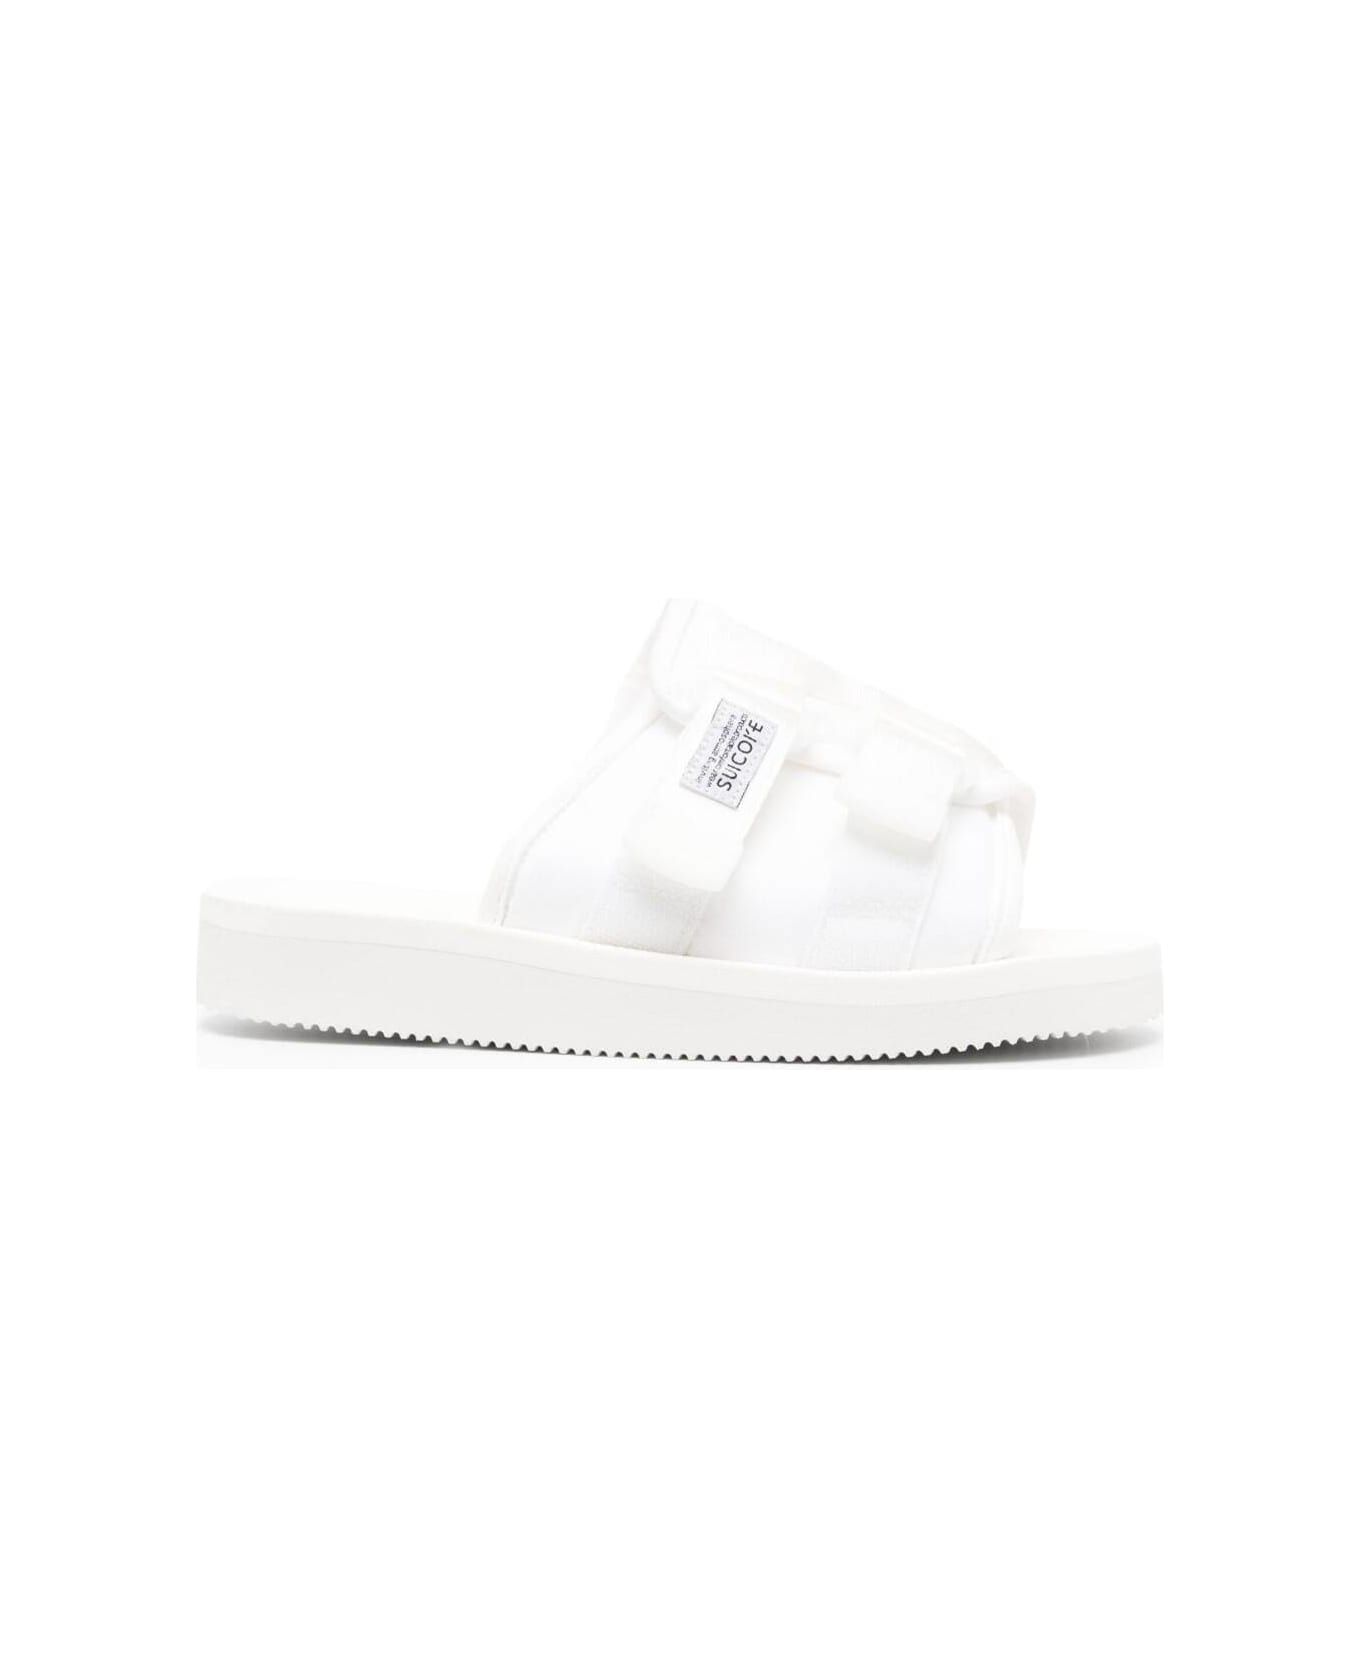 SUICOKE 'kaw-cab' White Sandals With Velcro Fastening In Nylon Man Suicoke - White